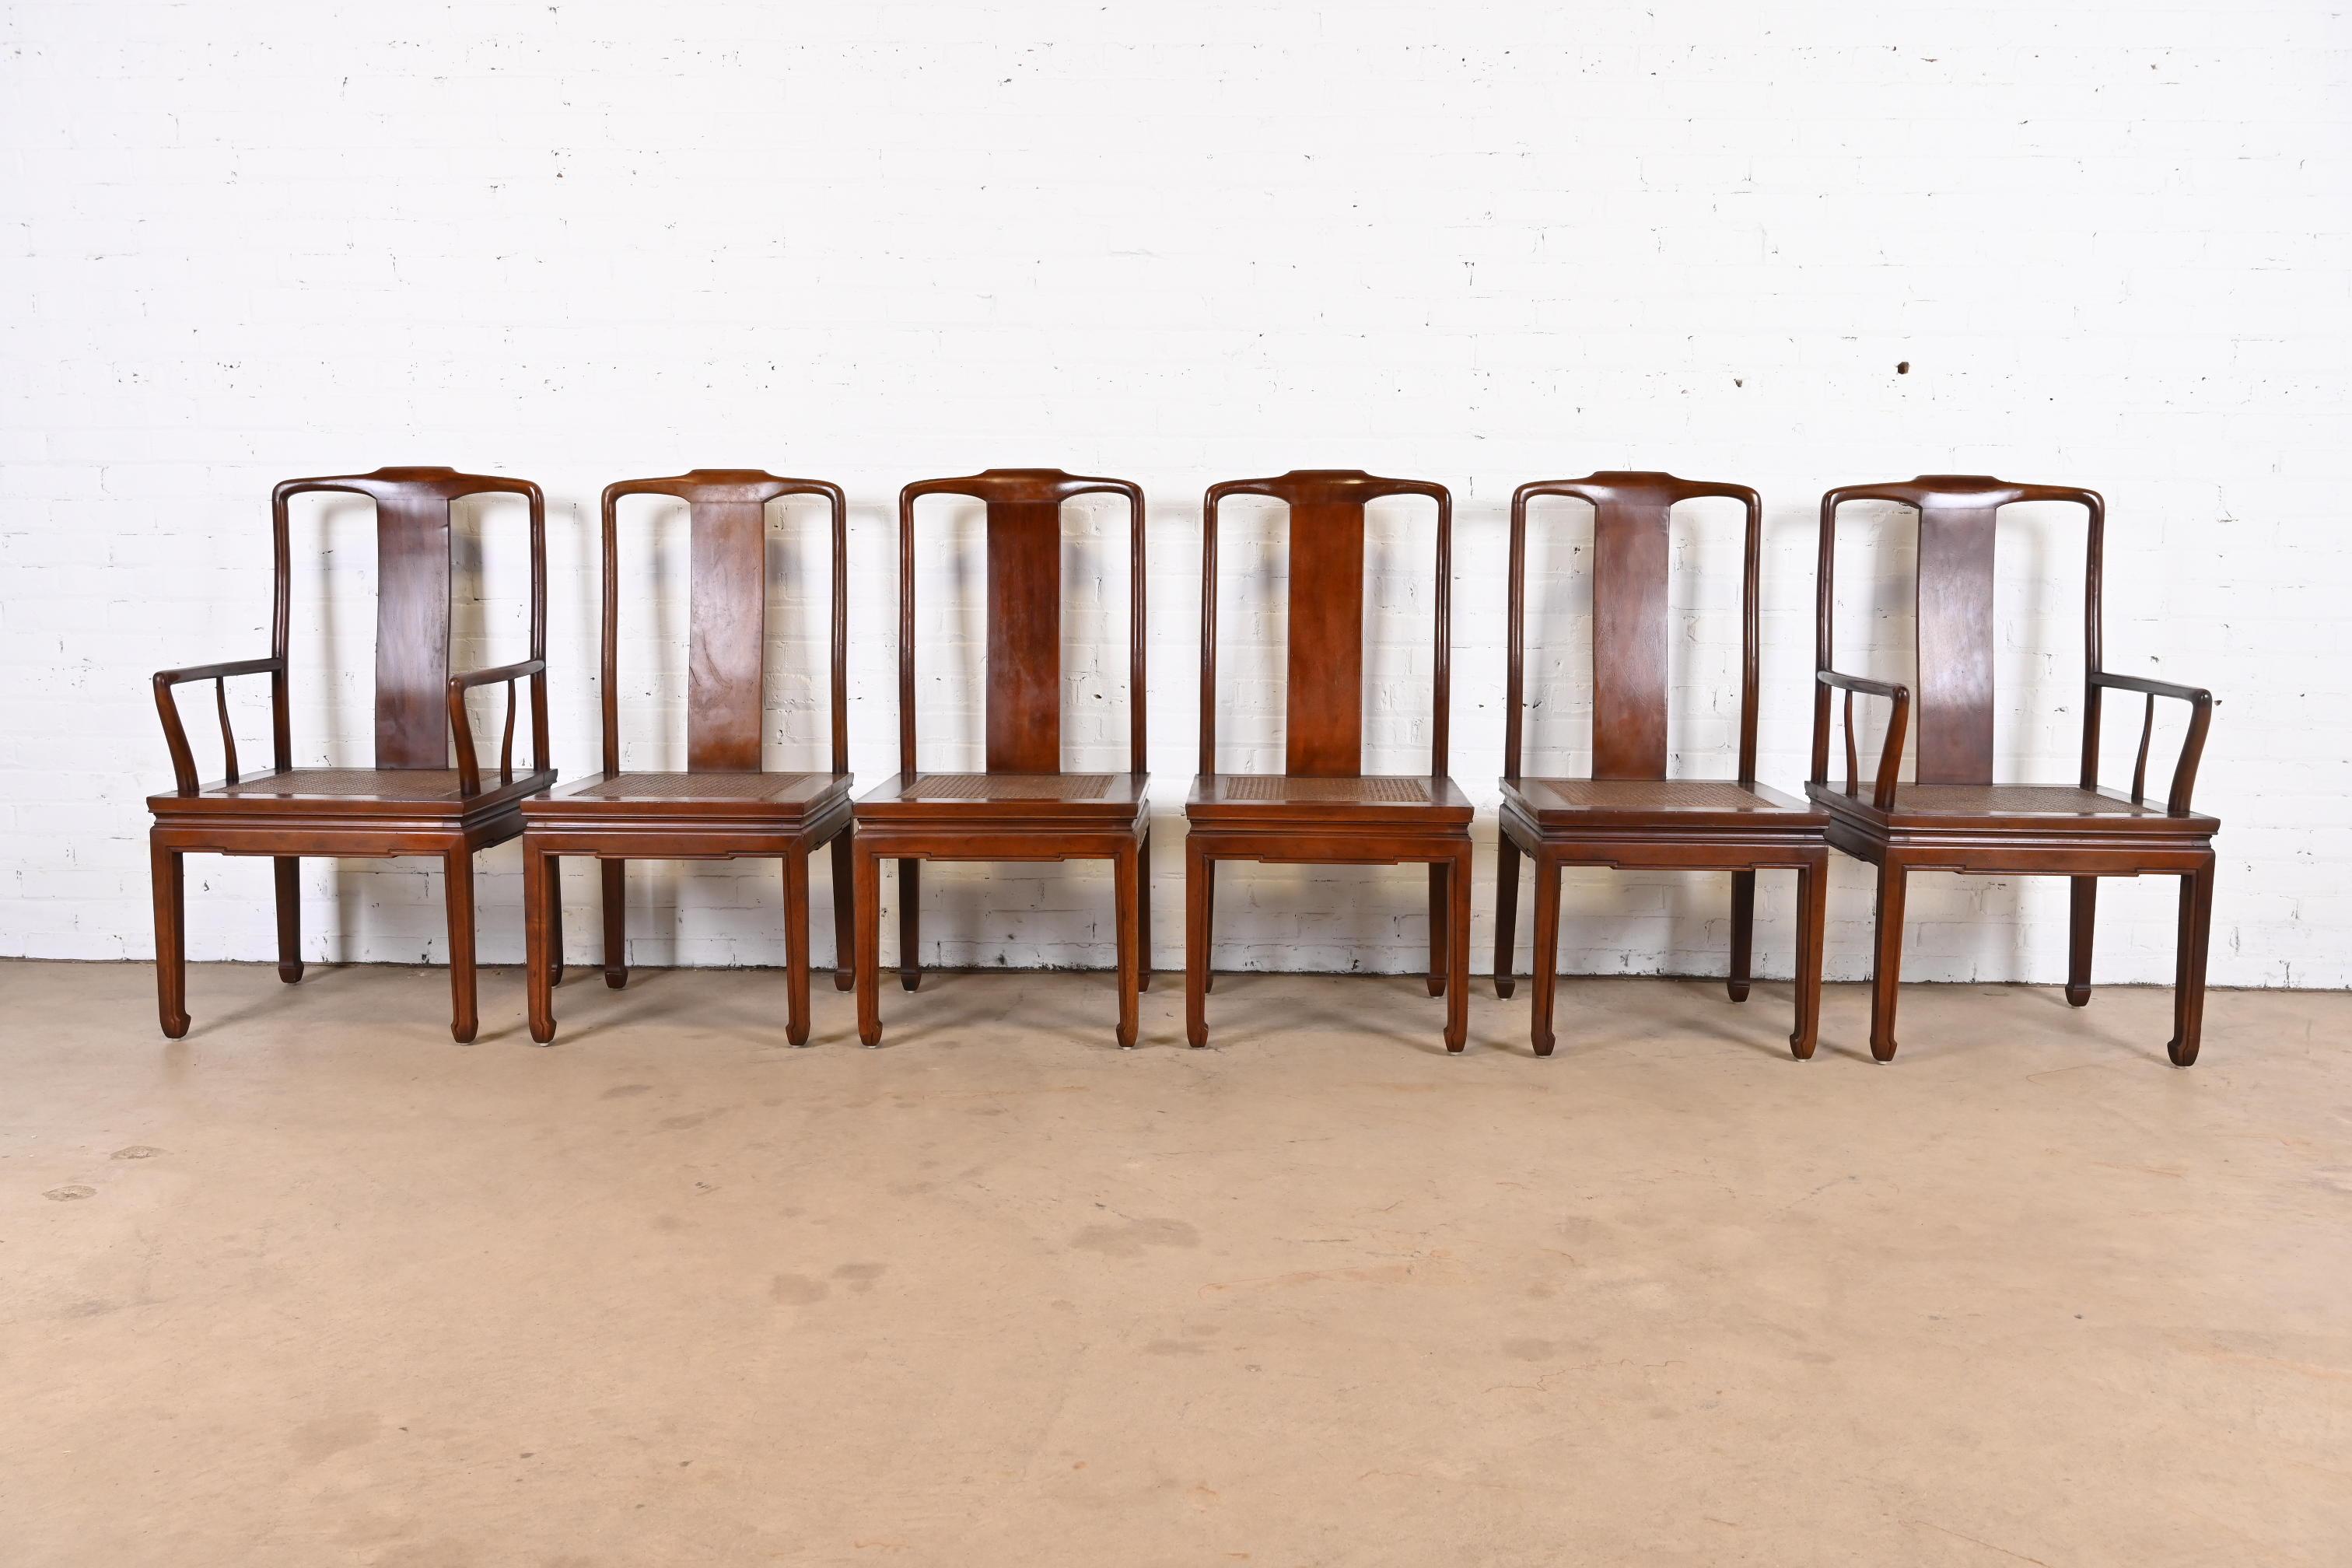 American Henredon Hollywood Regency Chinoiserie Mahogany and Cane Dining Chairs, Set of 6